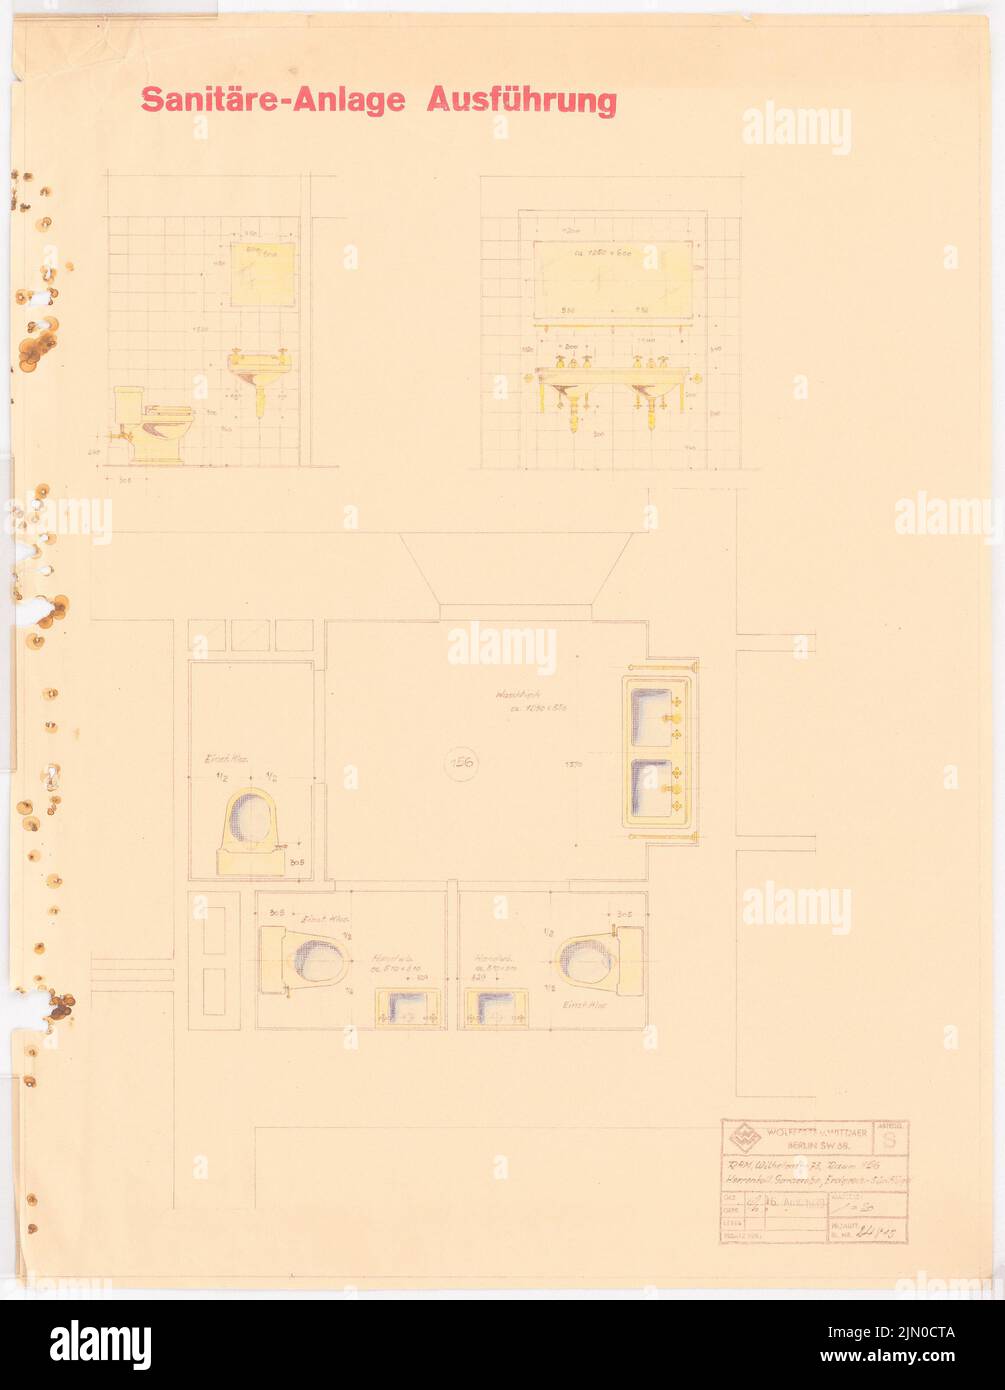 Böhmer Franz (1907-1943), official apartment of the Reich Foreign Minister Joachim von Ribbentrop in Berlin-Mitte (16.08.1939): Sanitary facility on the ground floor south wing: floor plan, views 1:20. Colored pencil over a break on paper, 51.6 x 39.9 cm (including scan edges) Böhmer & Petrich : Dienstwohnung des Reichsaußenministers Joachim von Ribbentrop, Berlin-Mitte. Umbau Stock Photo